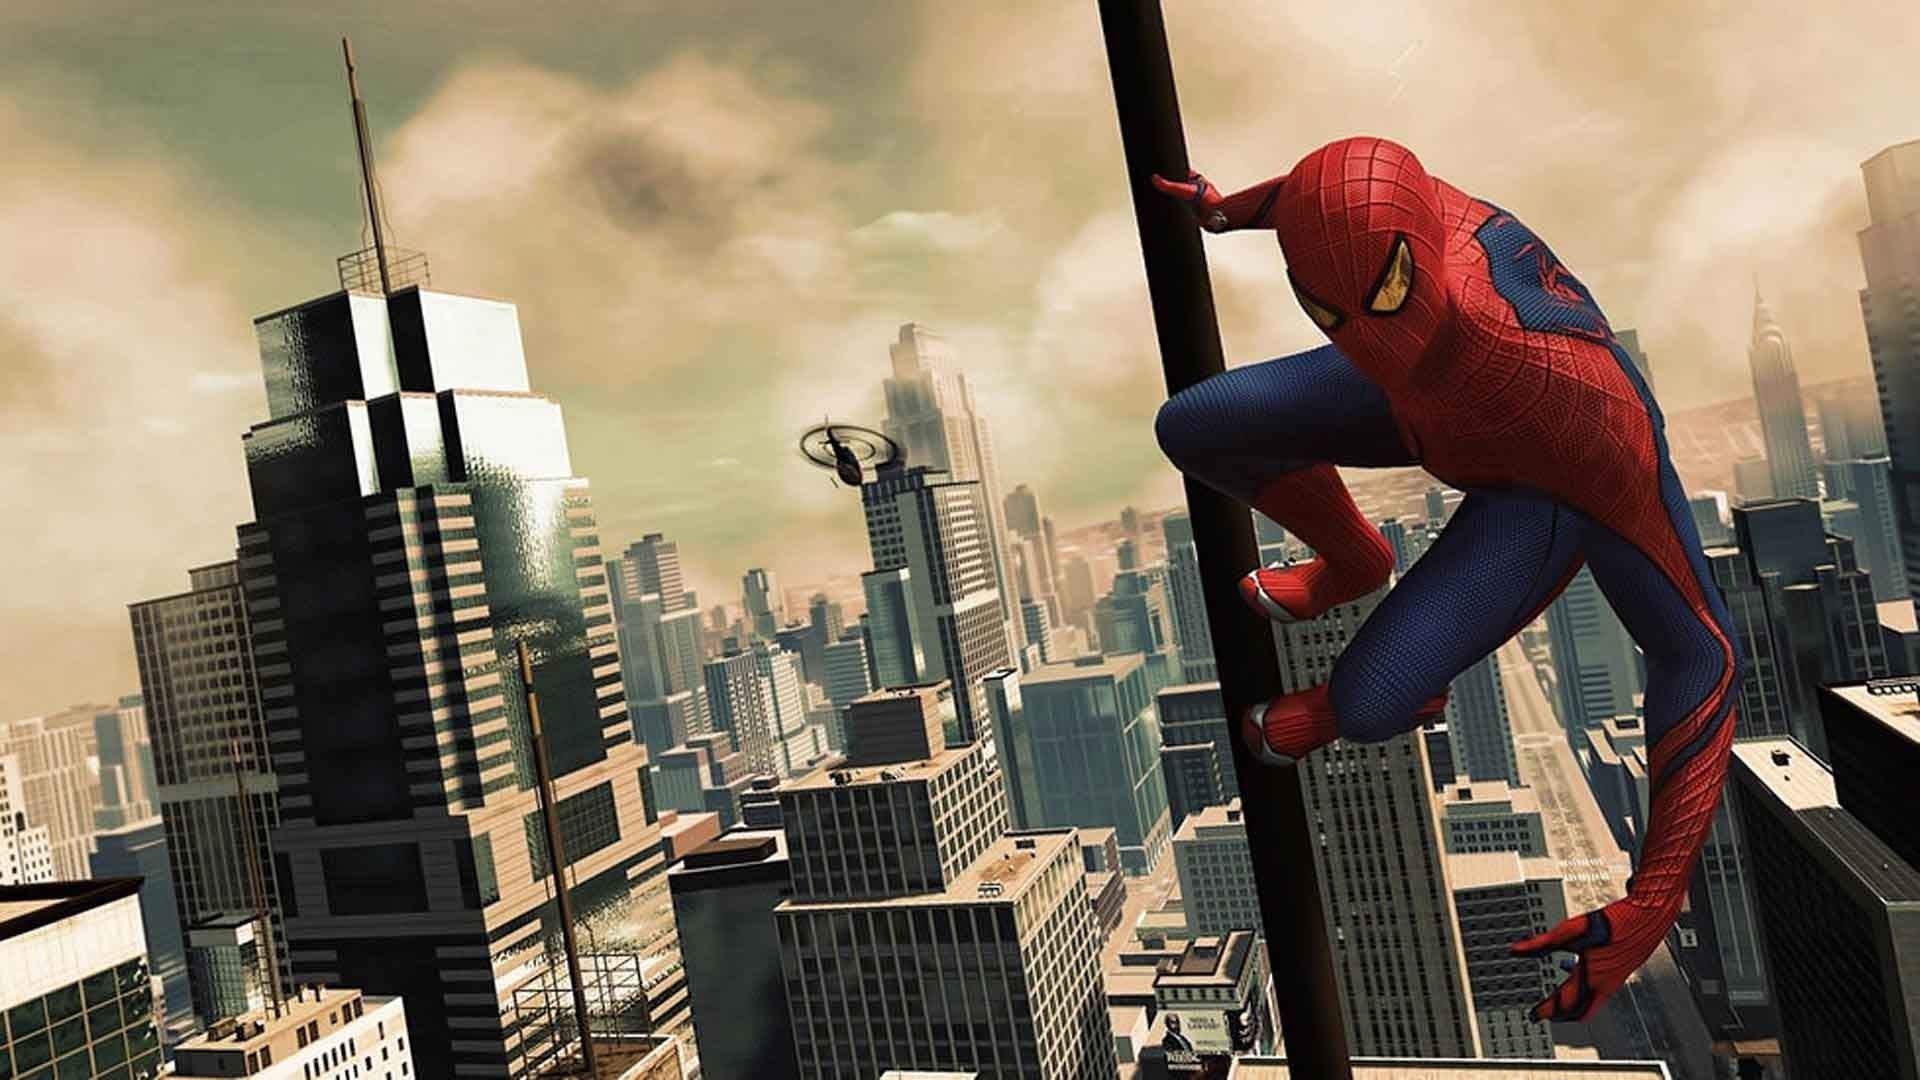 The Amazing Spider Man 2 Wallpaper background picture